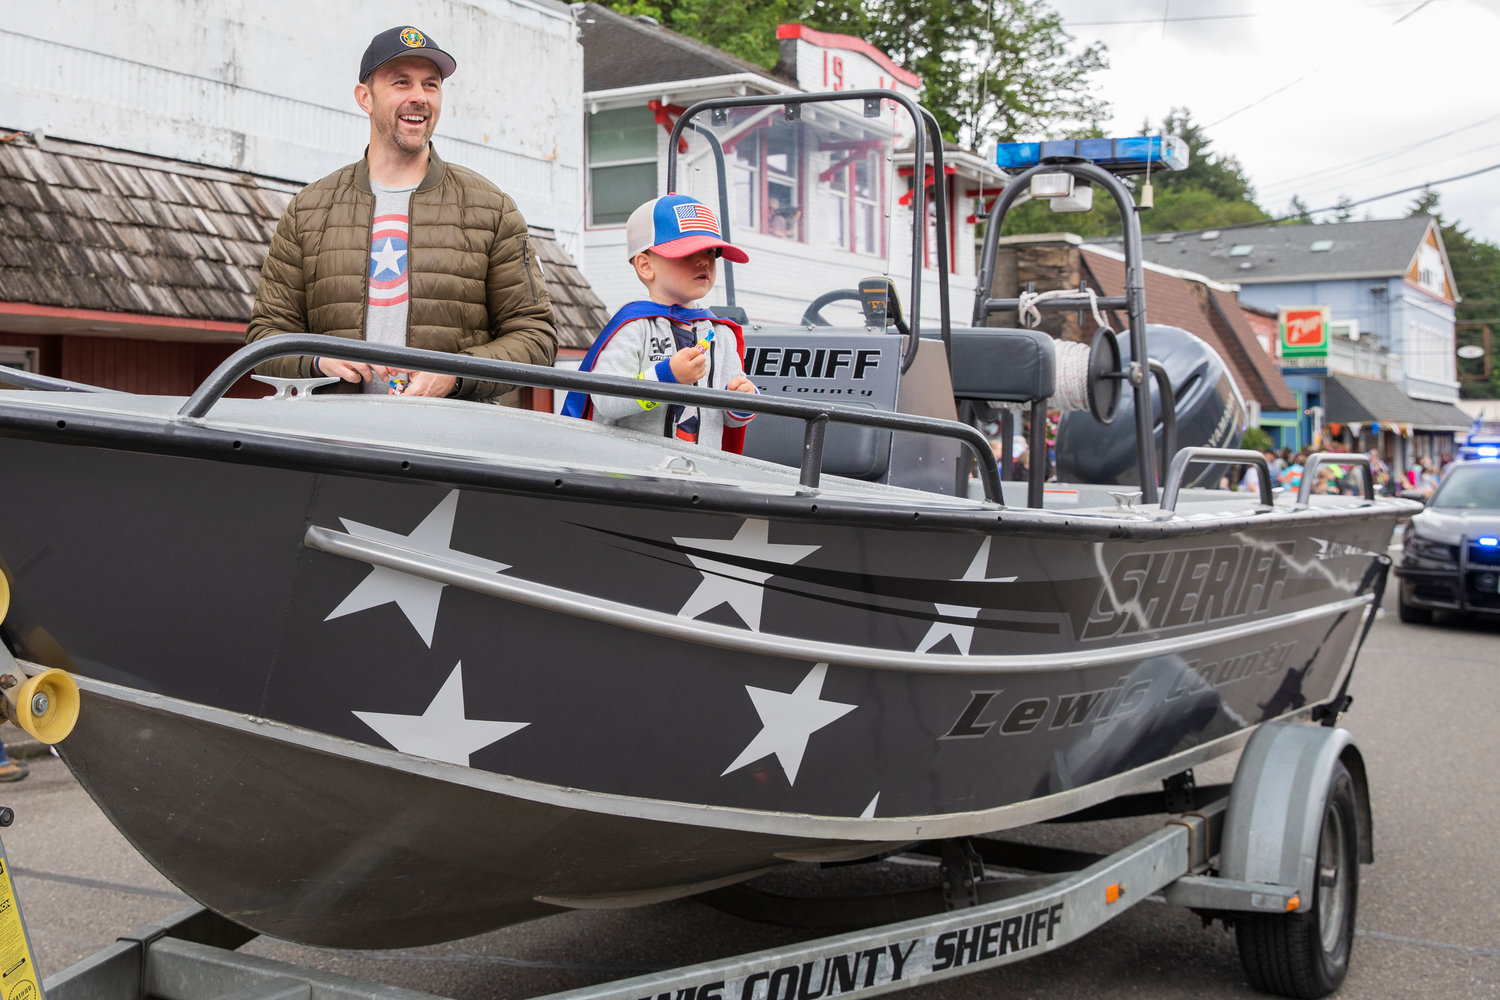 Commissioner Sean Swope laughs while throwing candy from a Lewis County Sheriff boat during the Egg Days Festival parade in Winlock on Saturday.